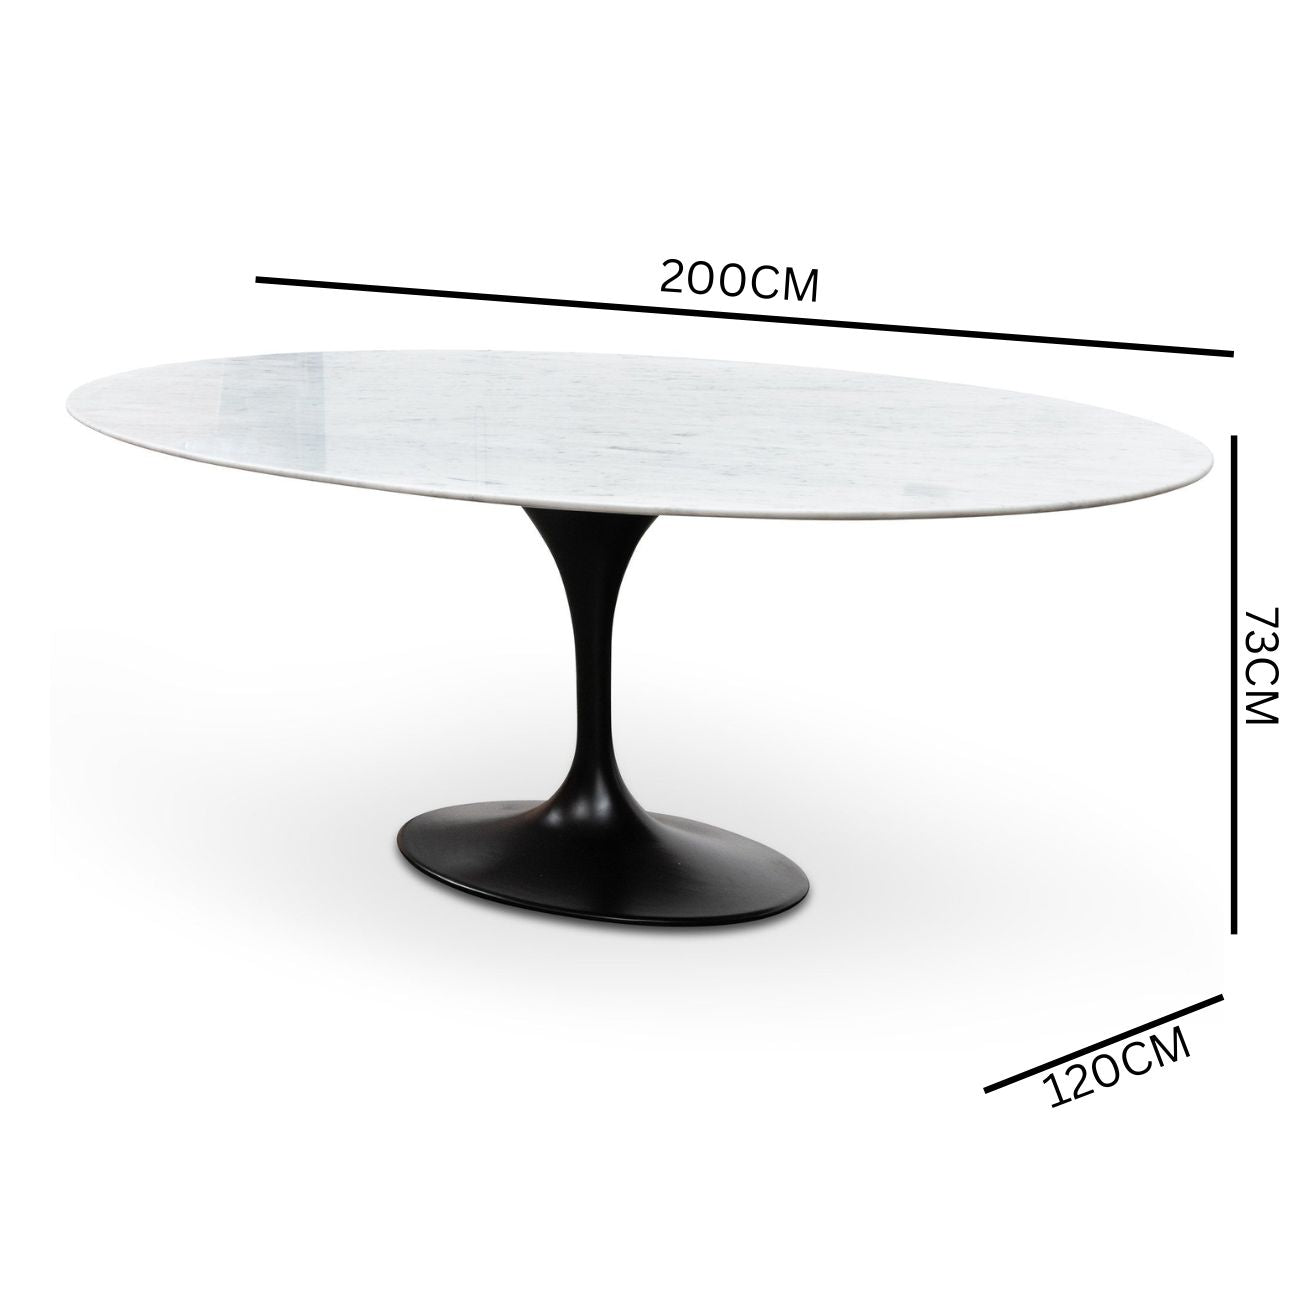 Rose 2m White Marble Oval Dining Table - Black Base